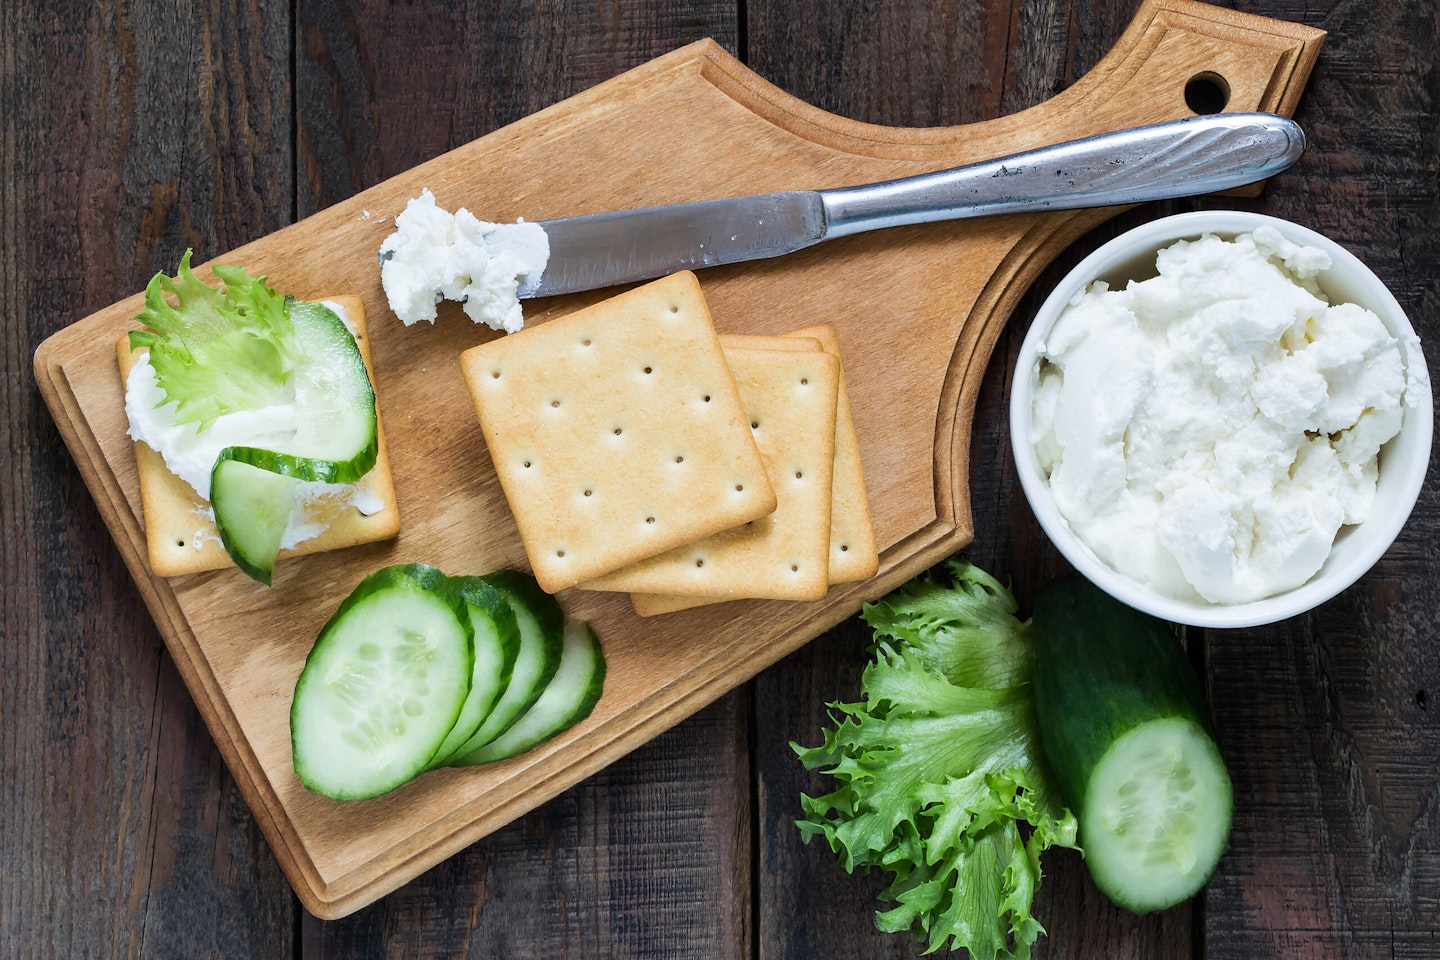 Oat or rye crackers with cheese and cucumber